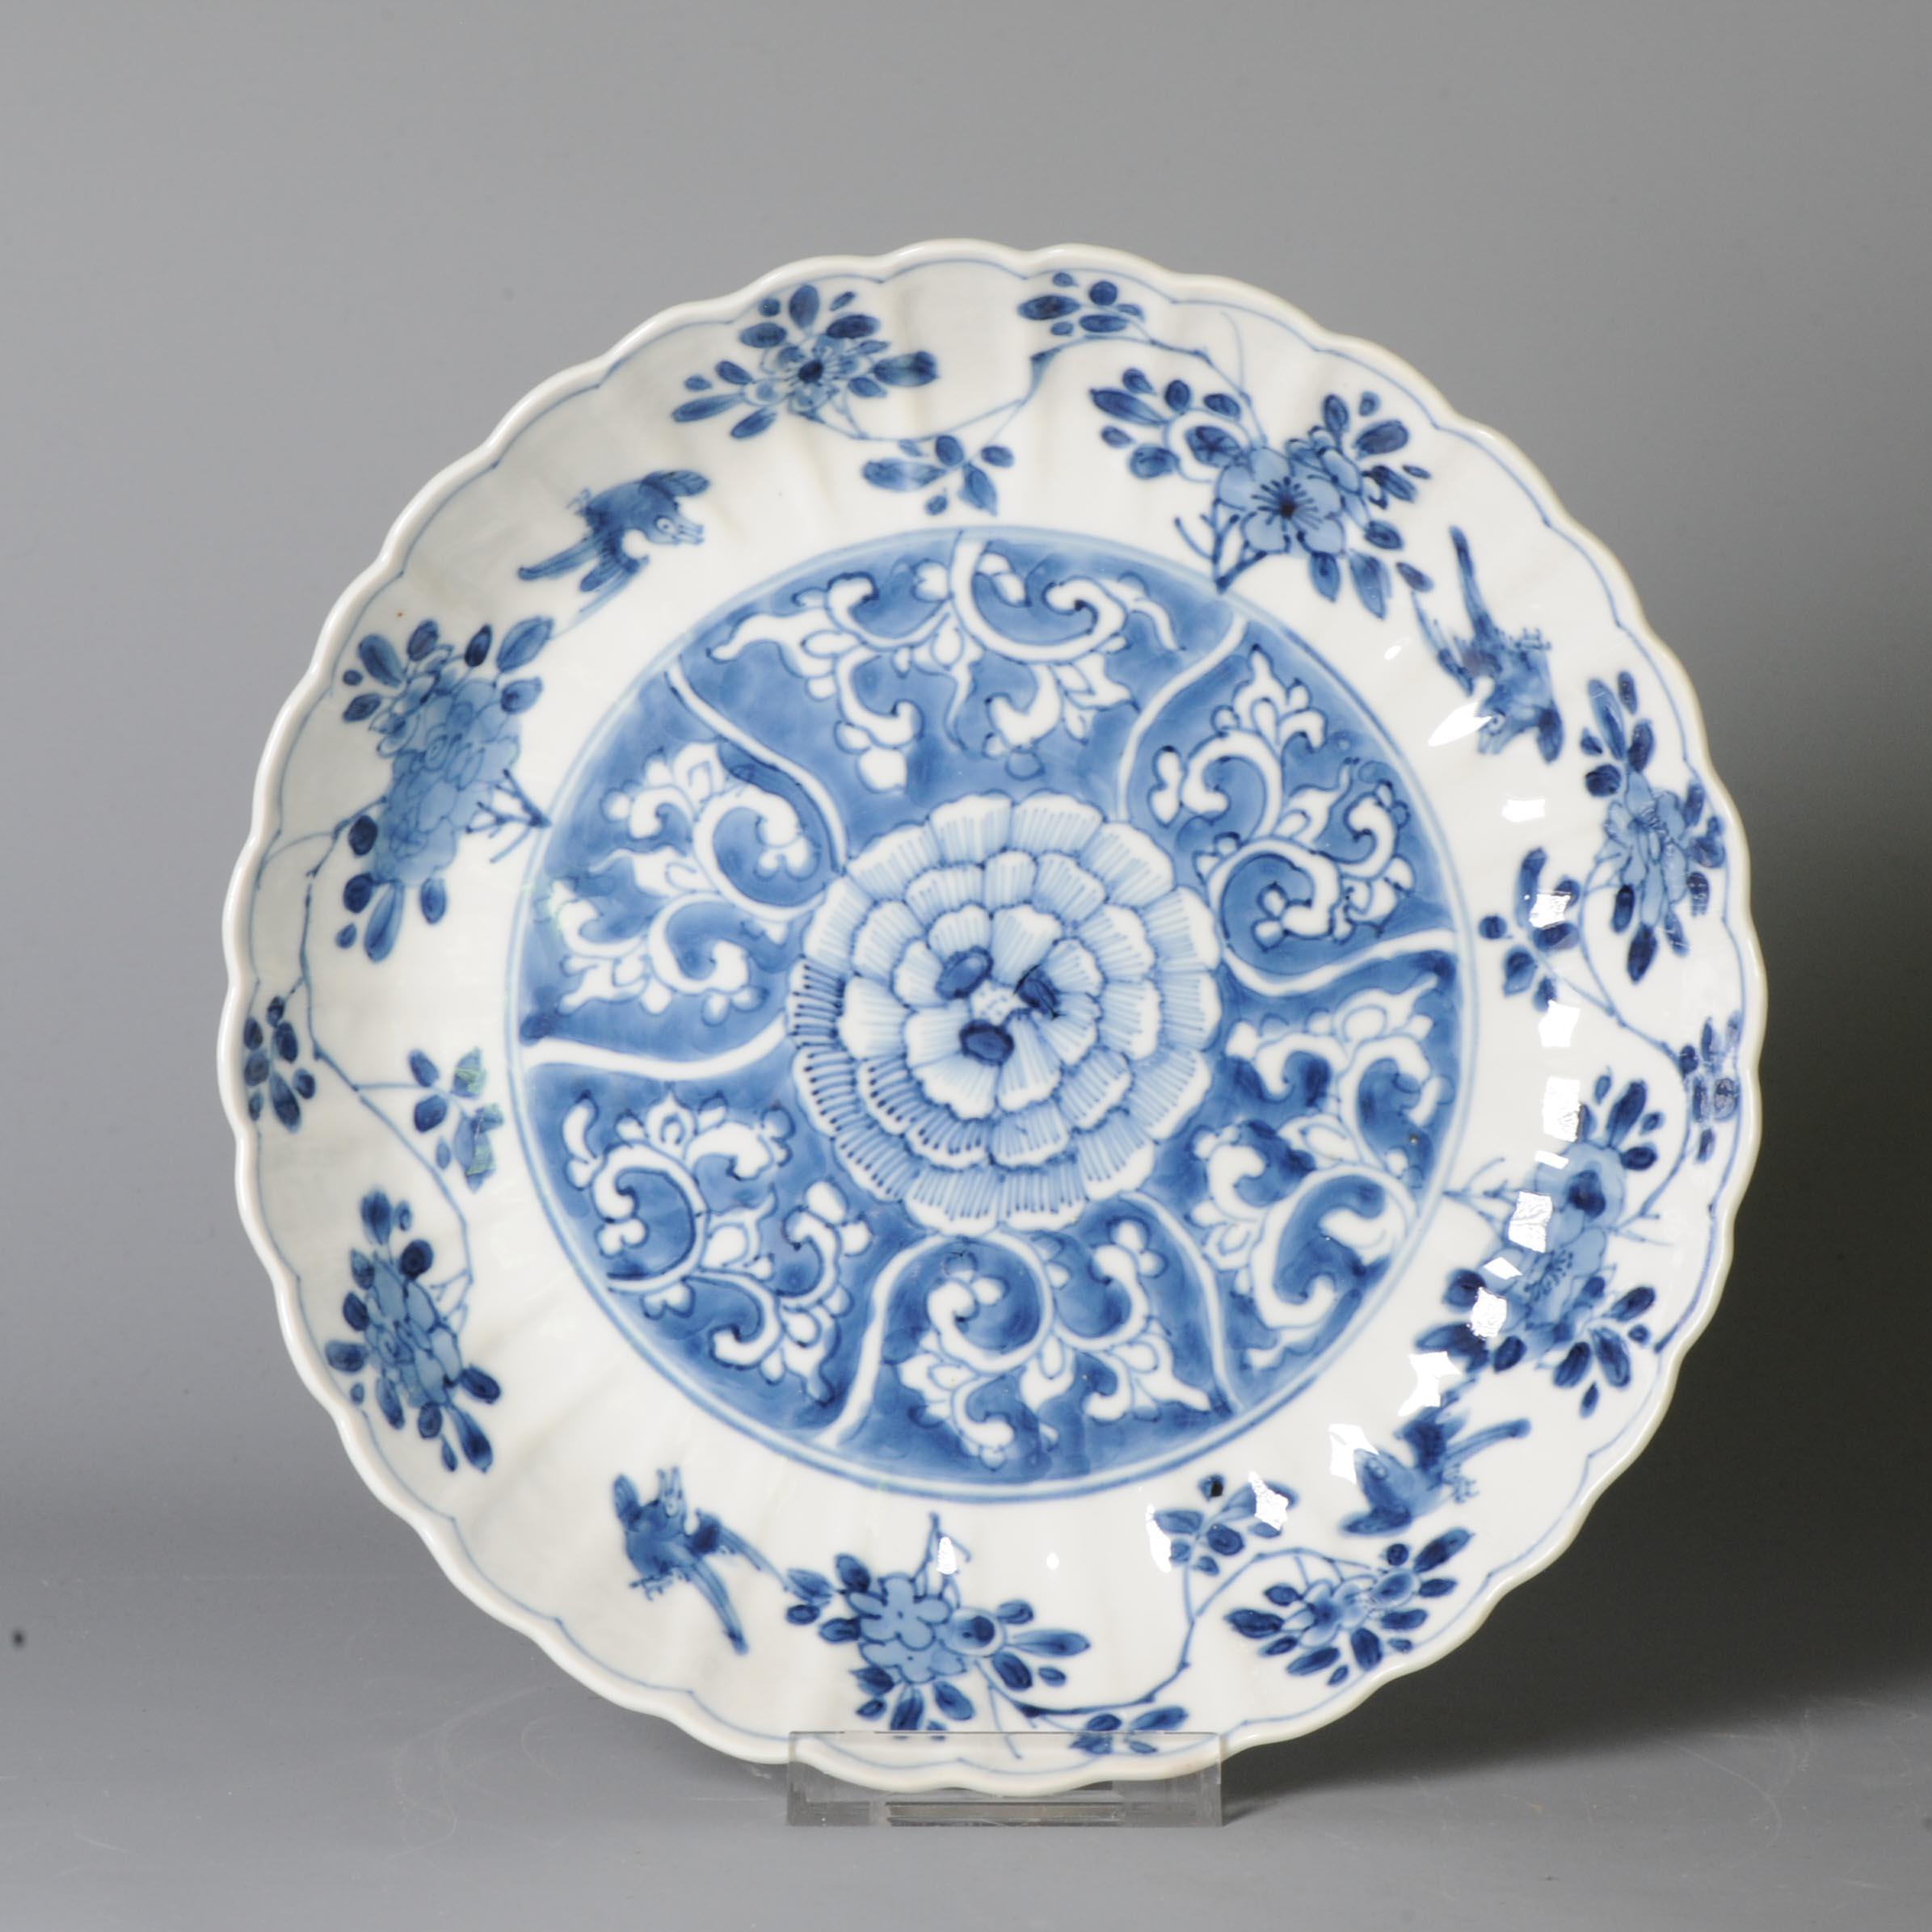 Qing A Rare Kangxi porcelain Blue and White Plates with Bird and floral decoration